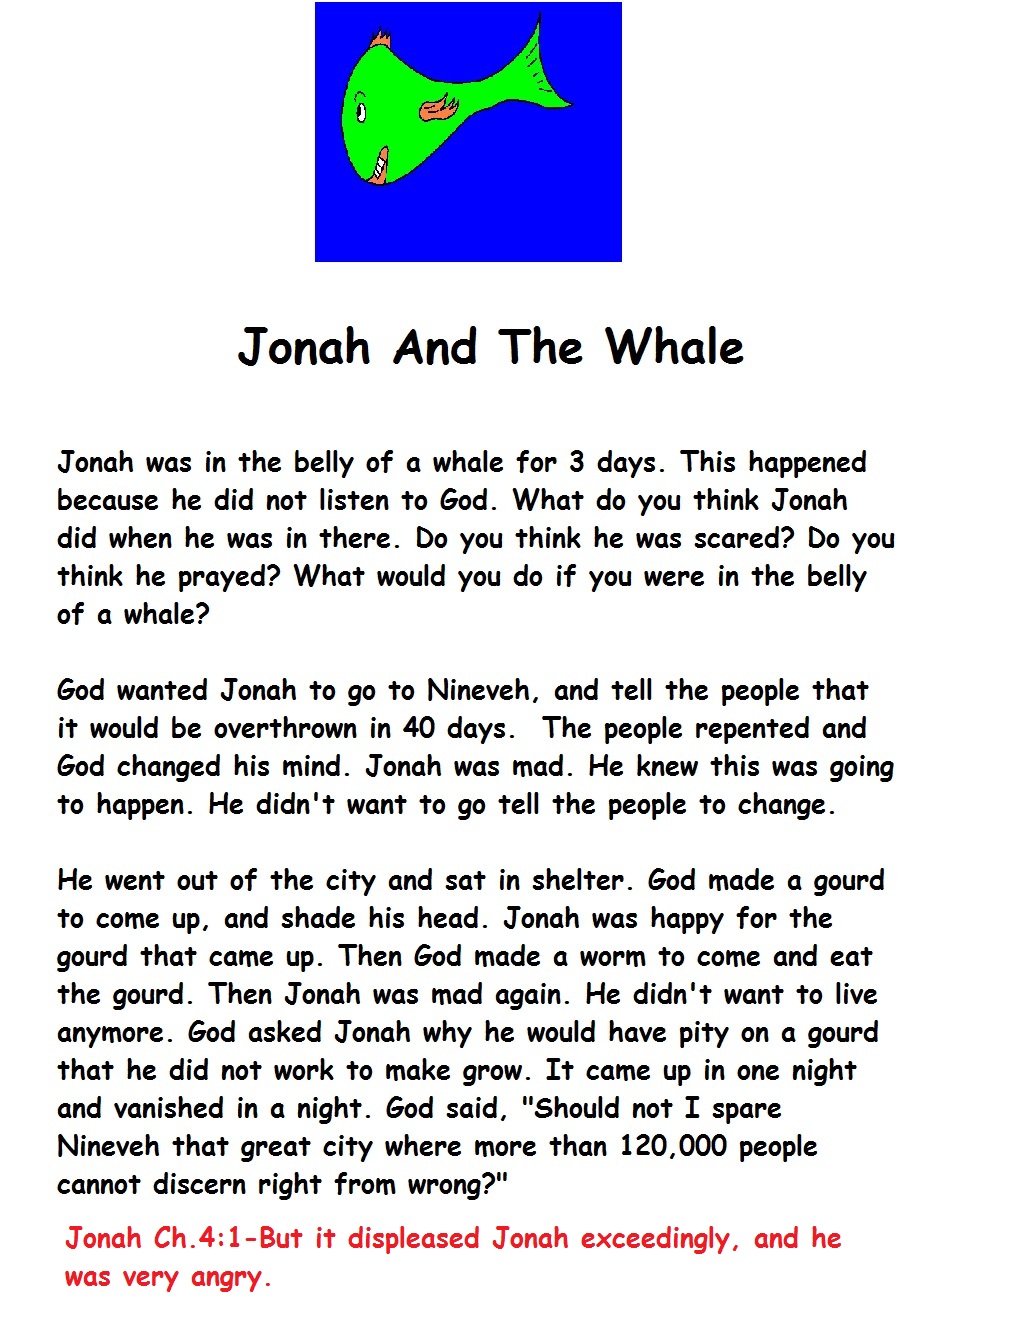 susanne-larsen-jonah-and-the-whale-activity-for-preschoolers-for-great-sex